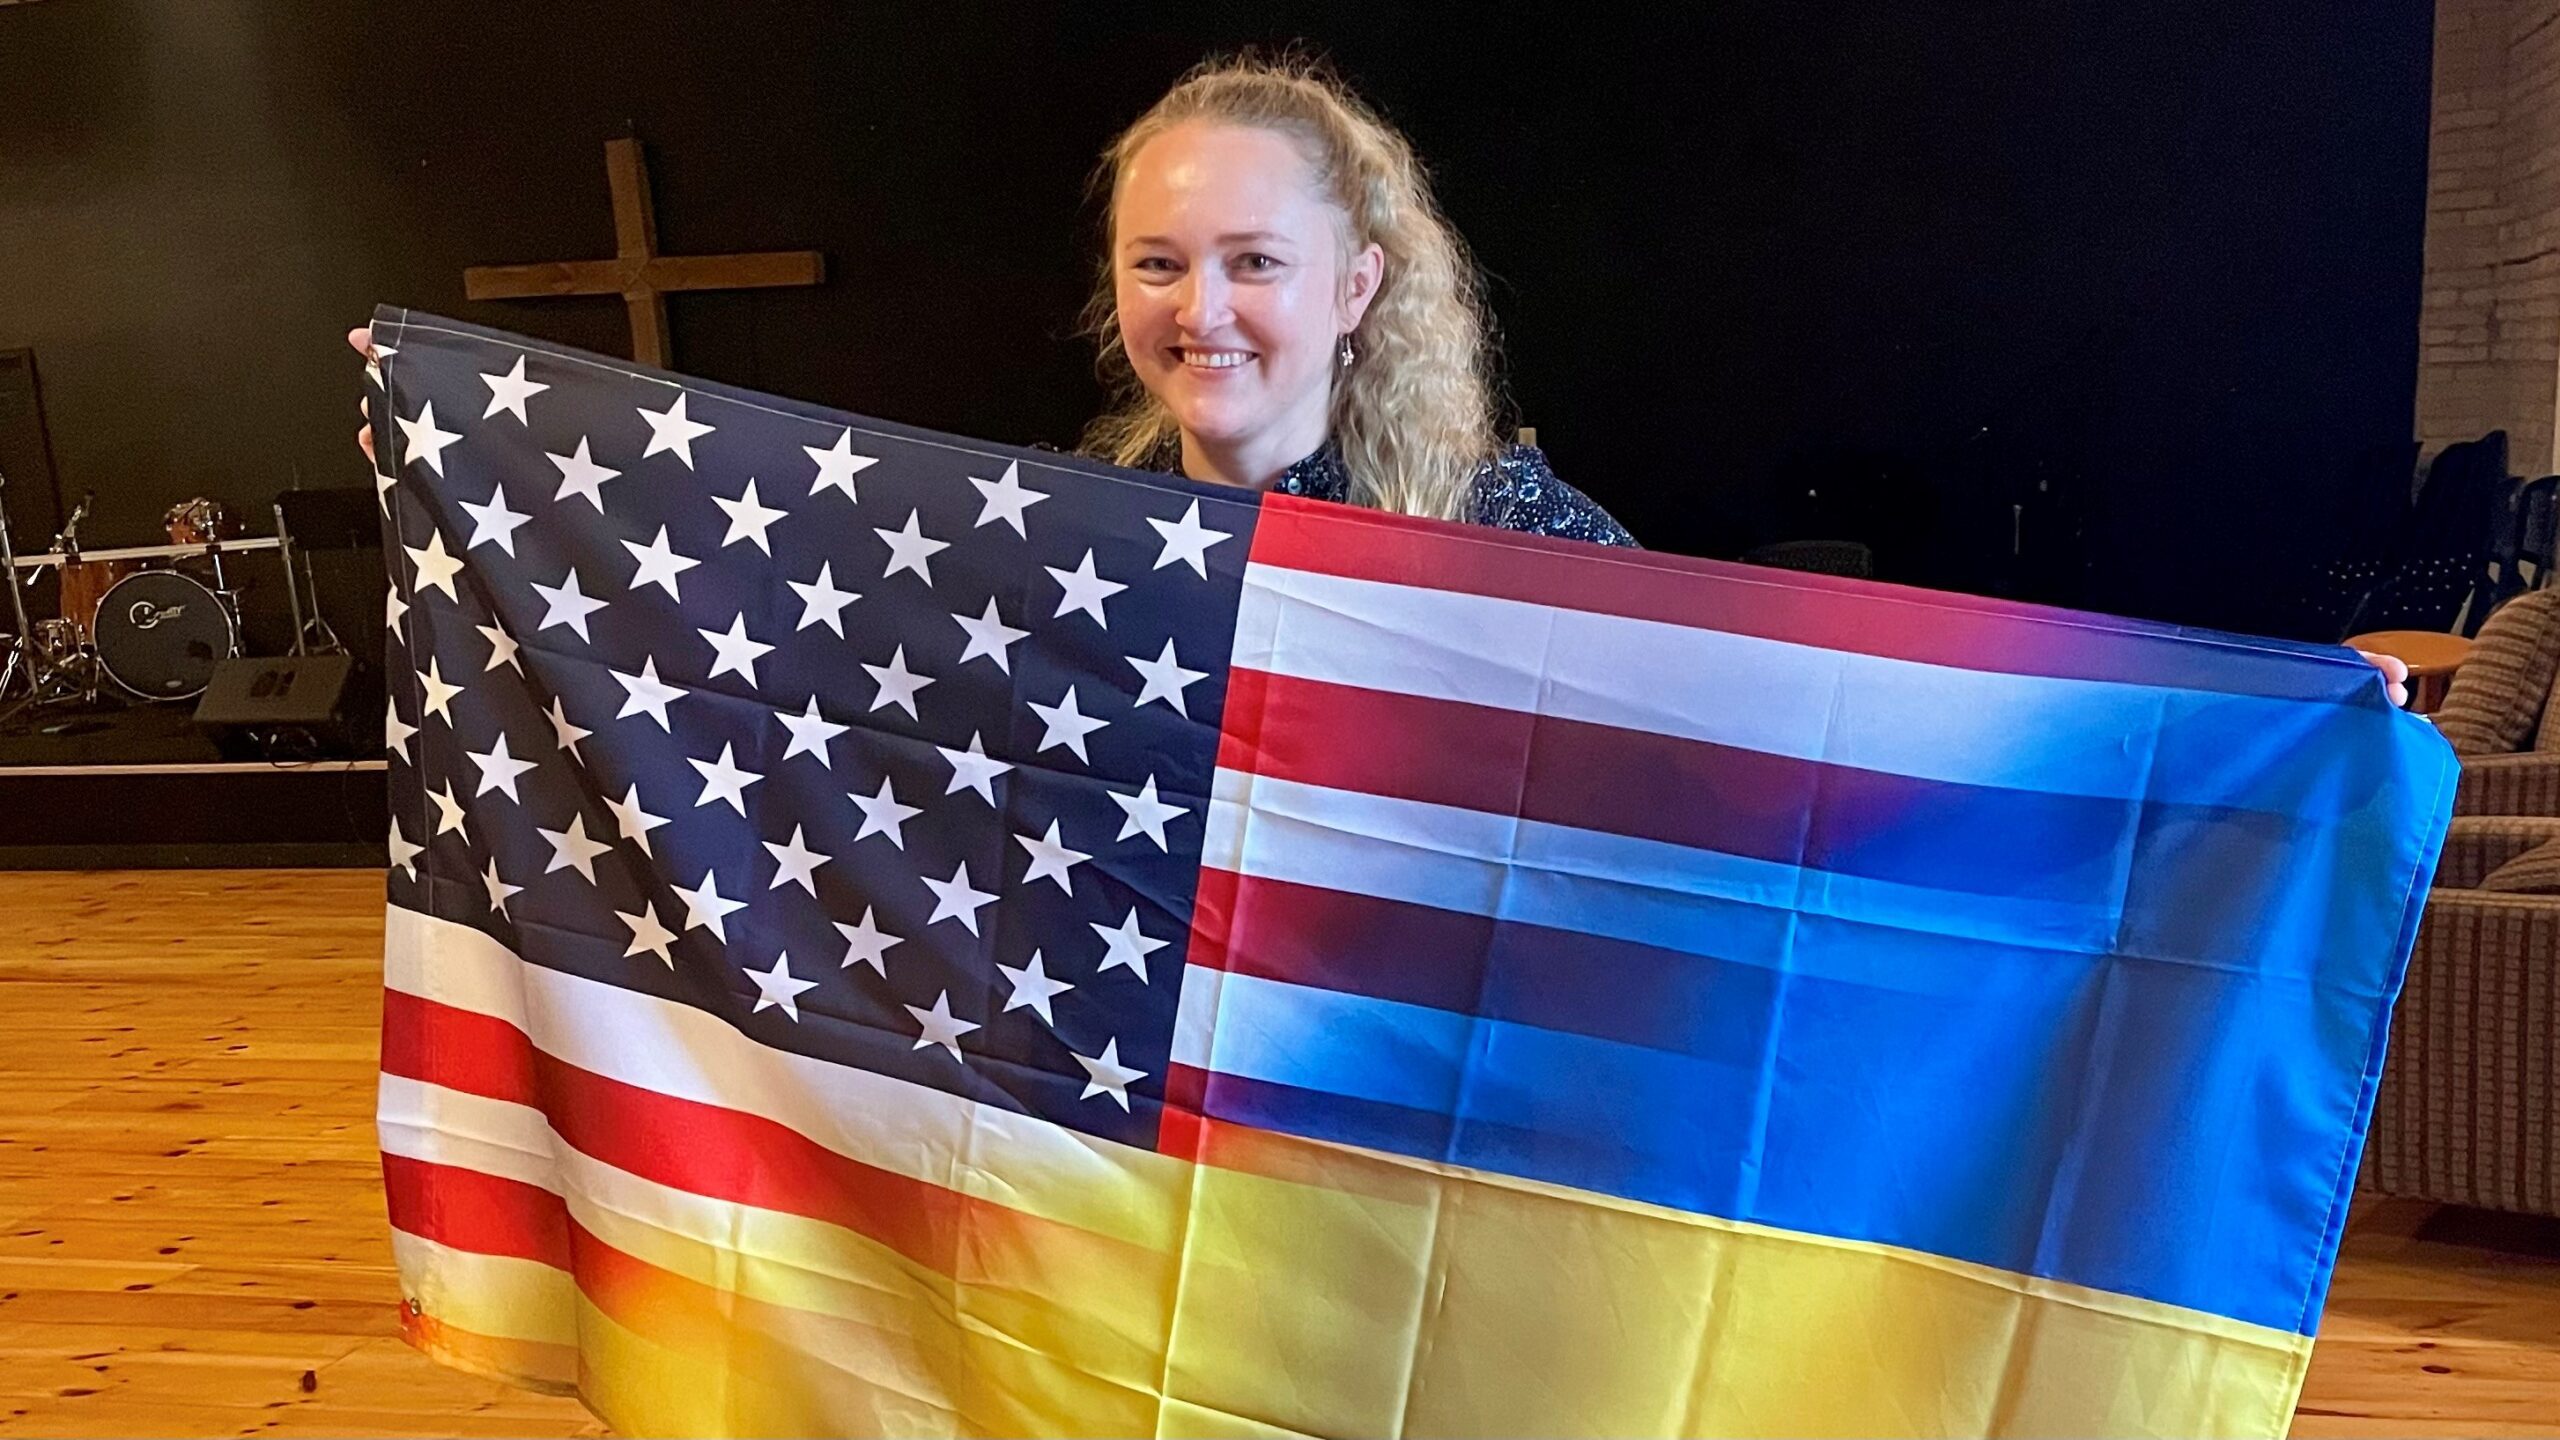 Galyna Tuttle holds a flag that is half American, half Ukrainian